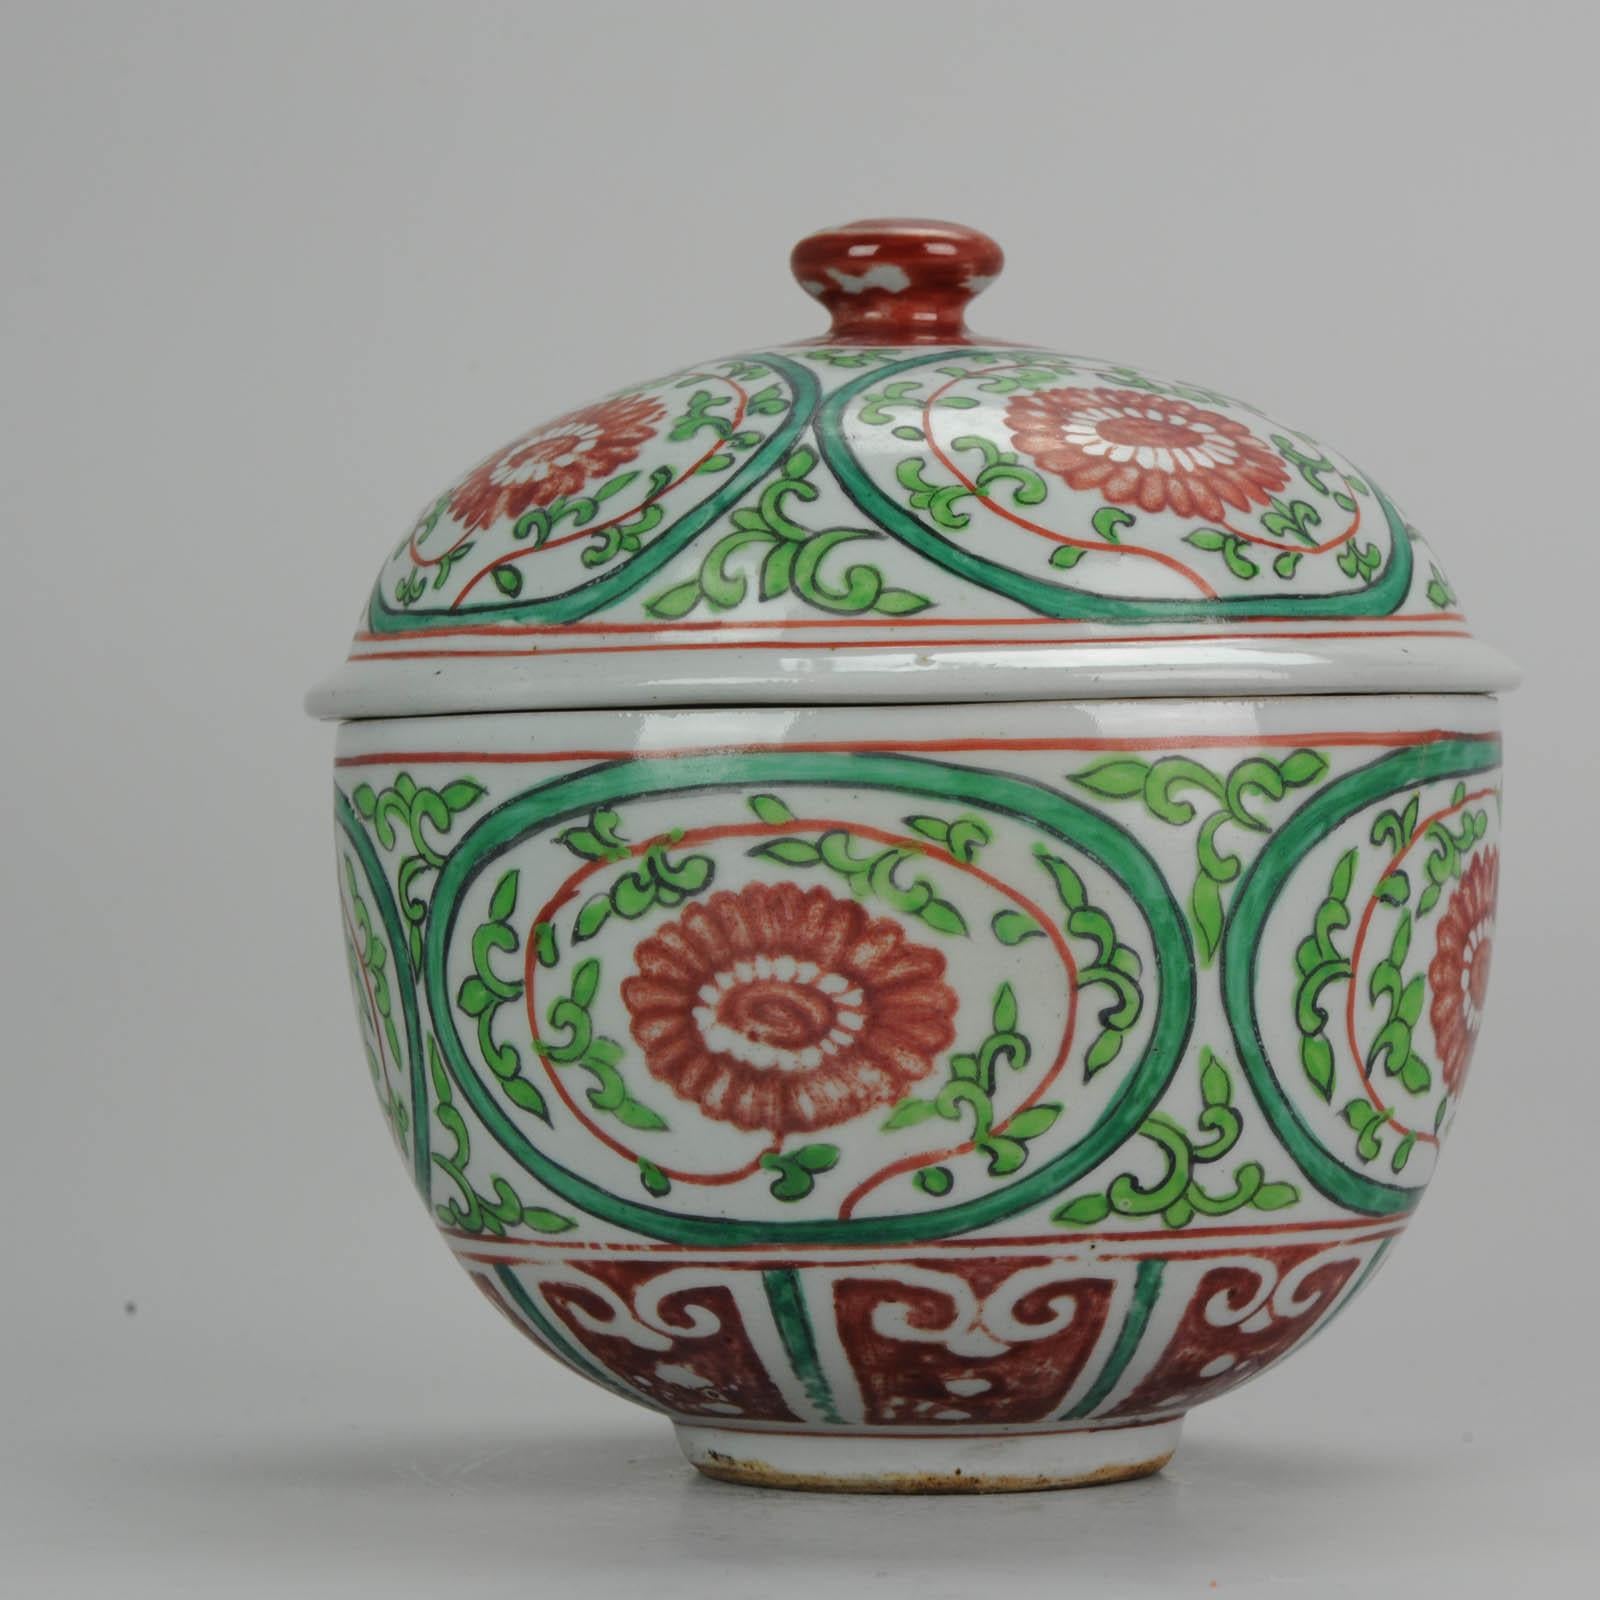 Antique Chinese Porcelain Jar 18th Century SE Asian Thai Market Bencharong Peony For Sale 2